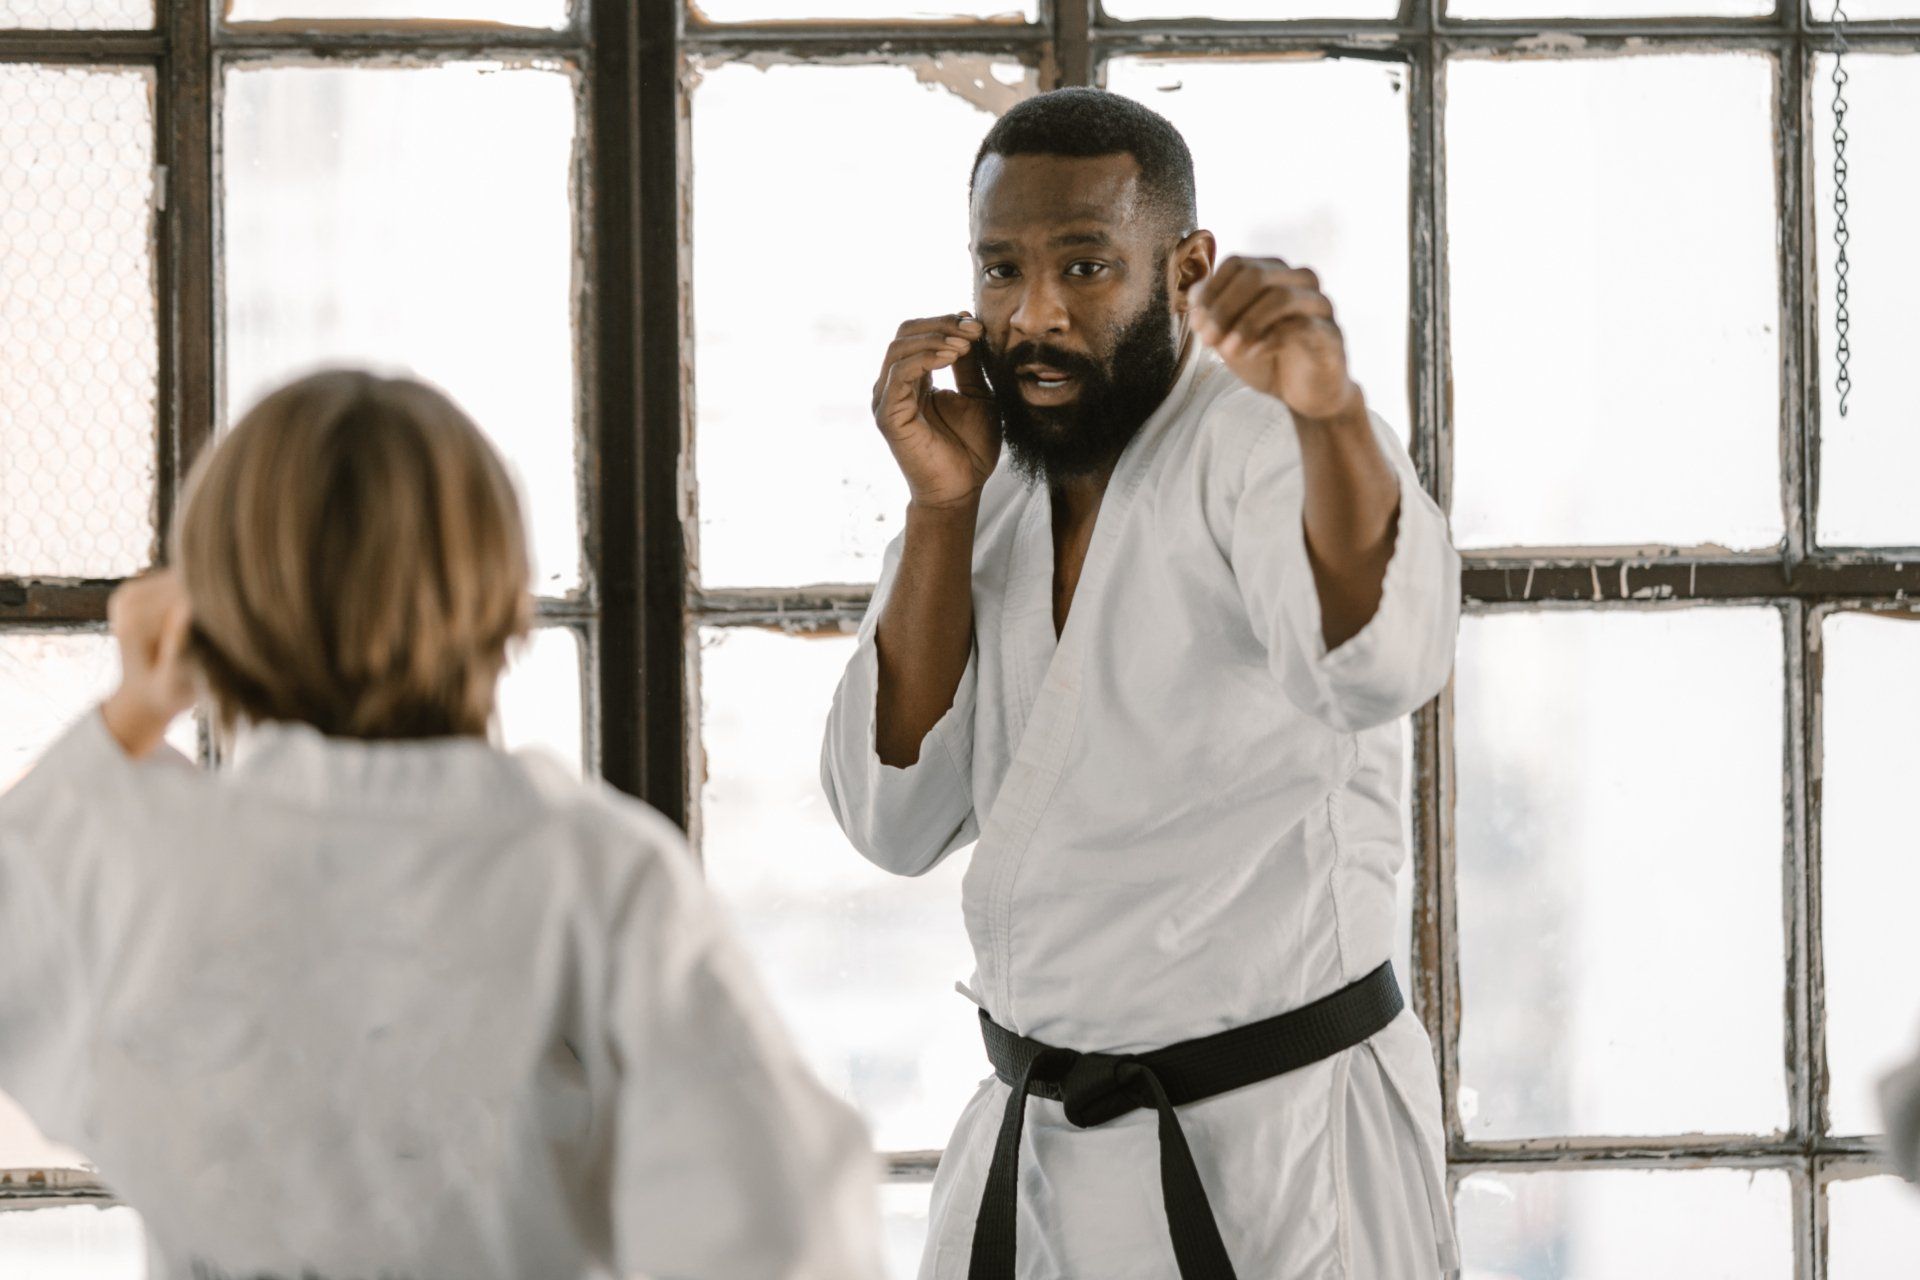 A man and a woman are practicing karate in a gym.